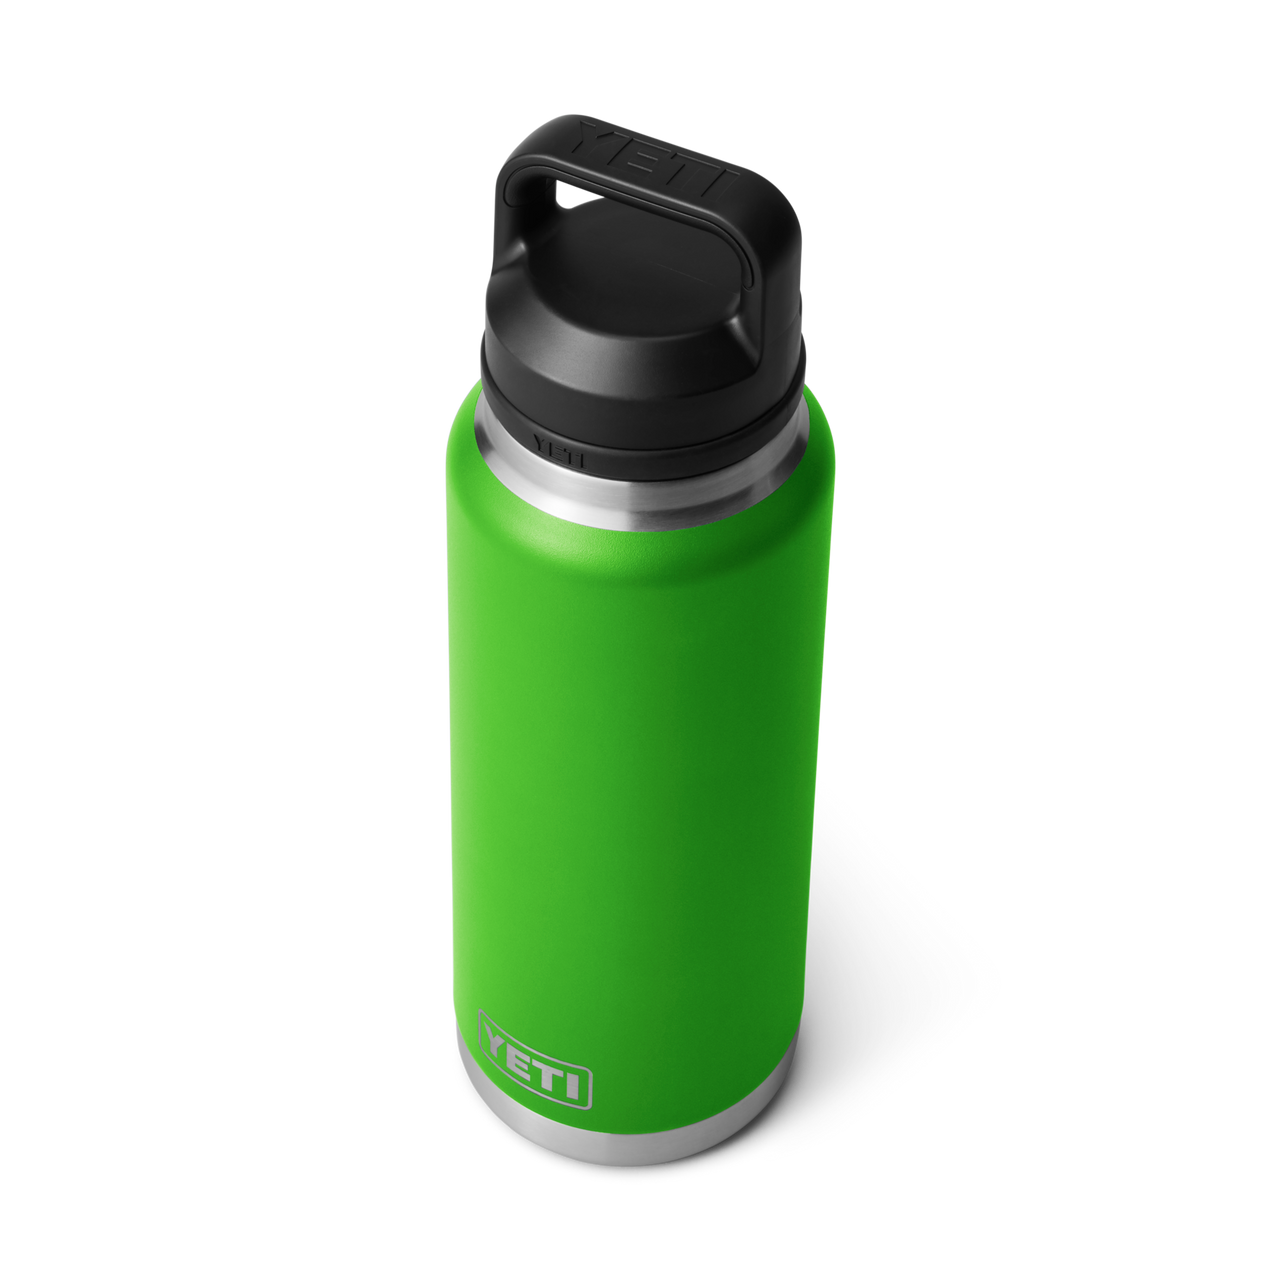 CHUG　STAINLESS　36　RAMBLER　CANOPY　GREEN-　WITH　VACUUM　BOTTLE，　STEEL　INSULATED，　CAP，　YETI　OZ